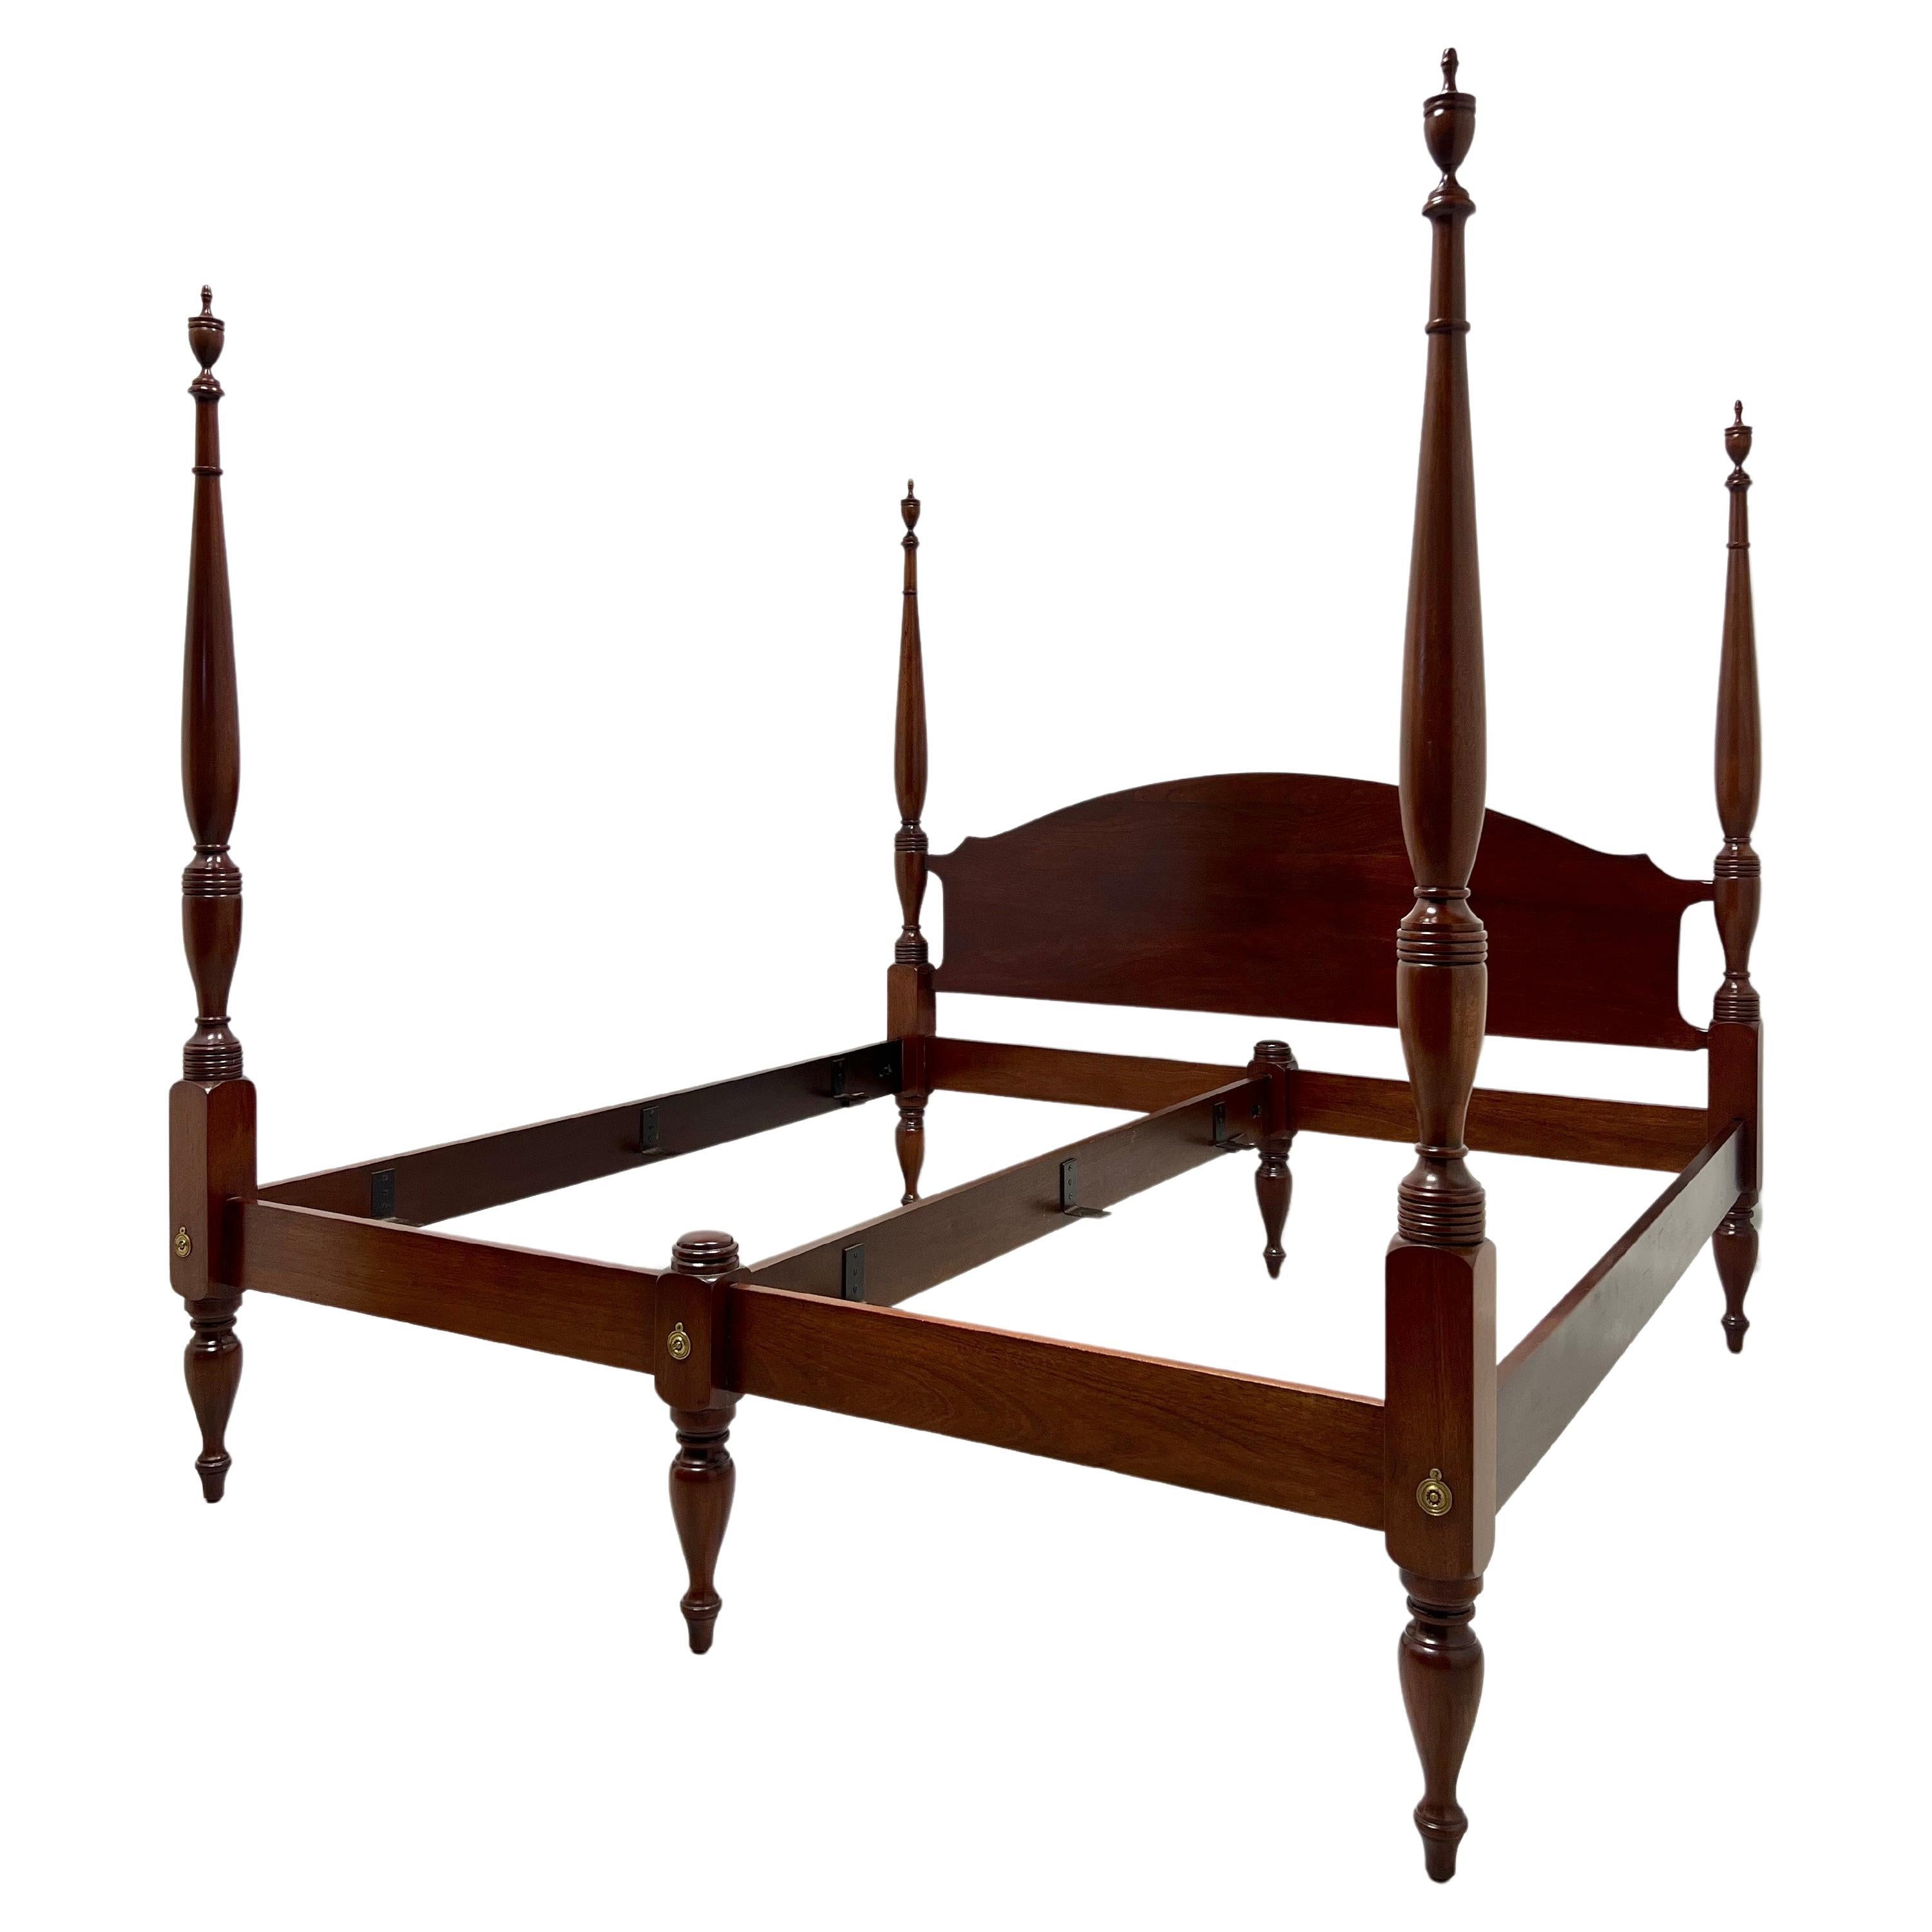 CRAFTIQUE Ashlawn Solid Mahogany Traditional King Size Four Poster Bed